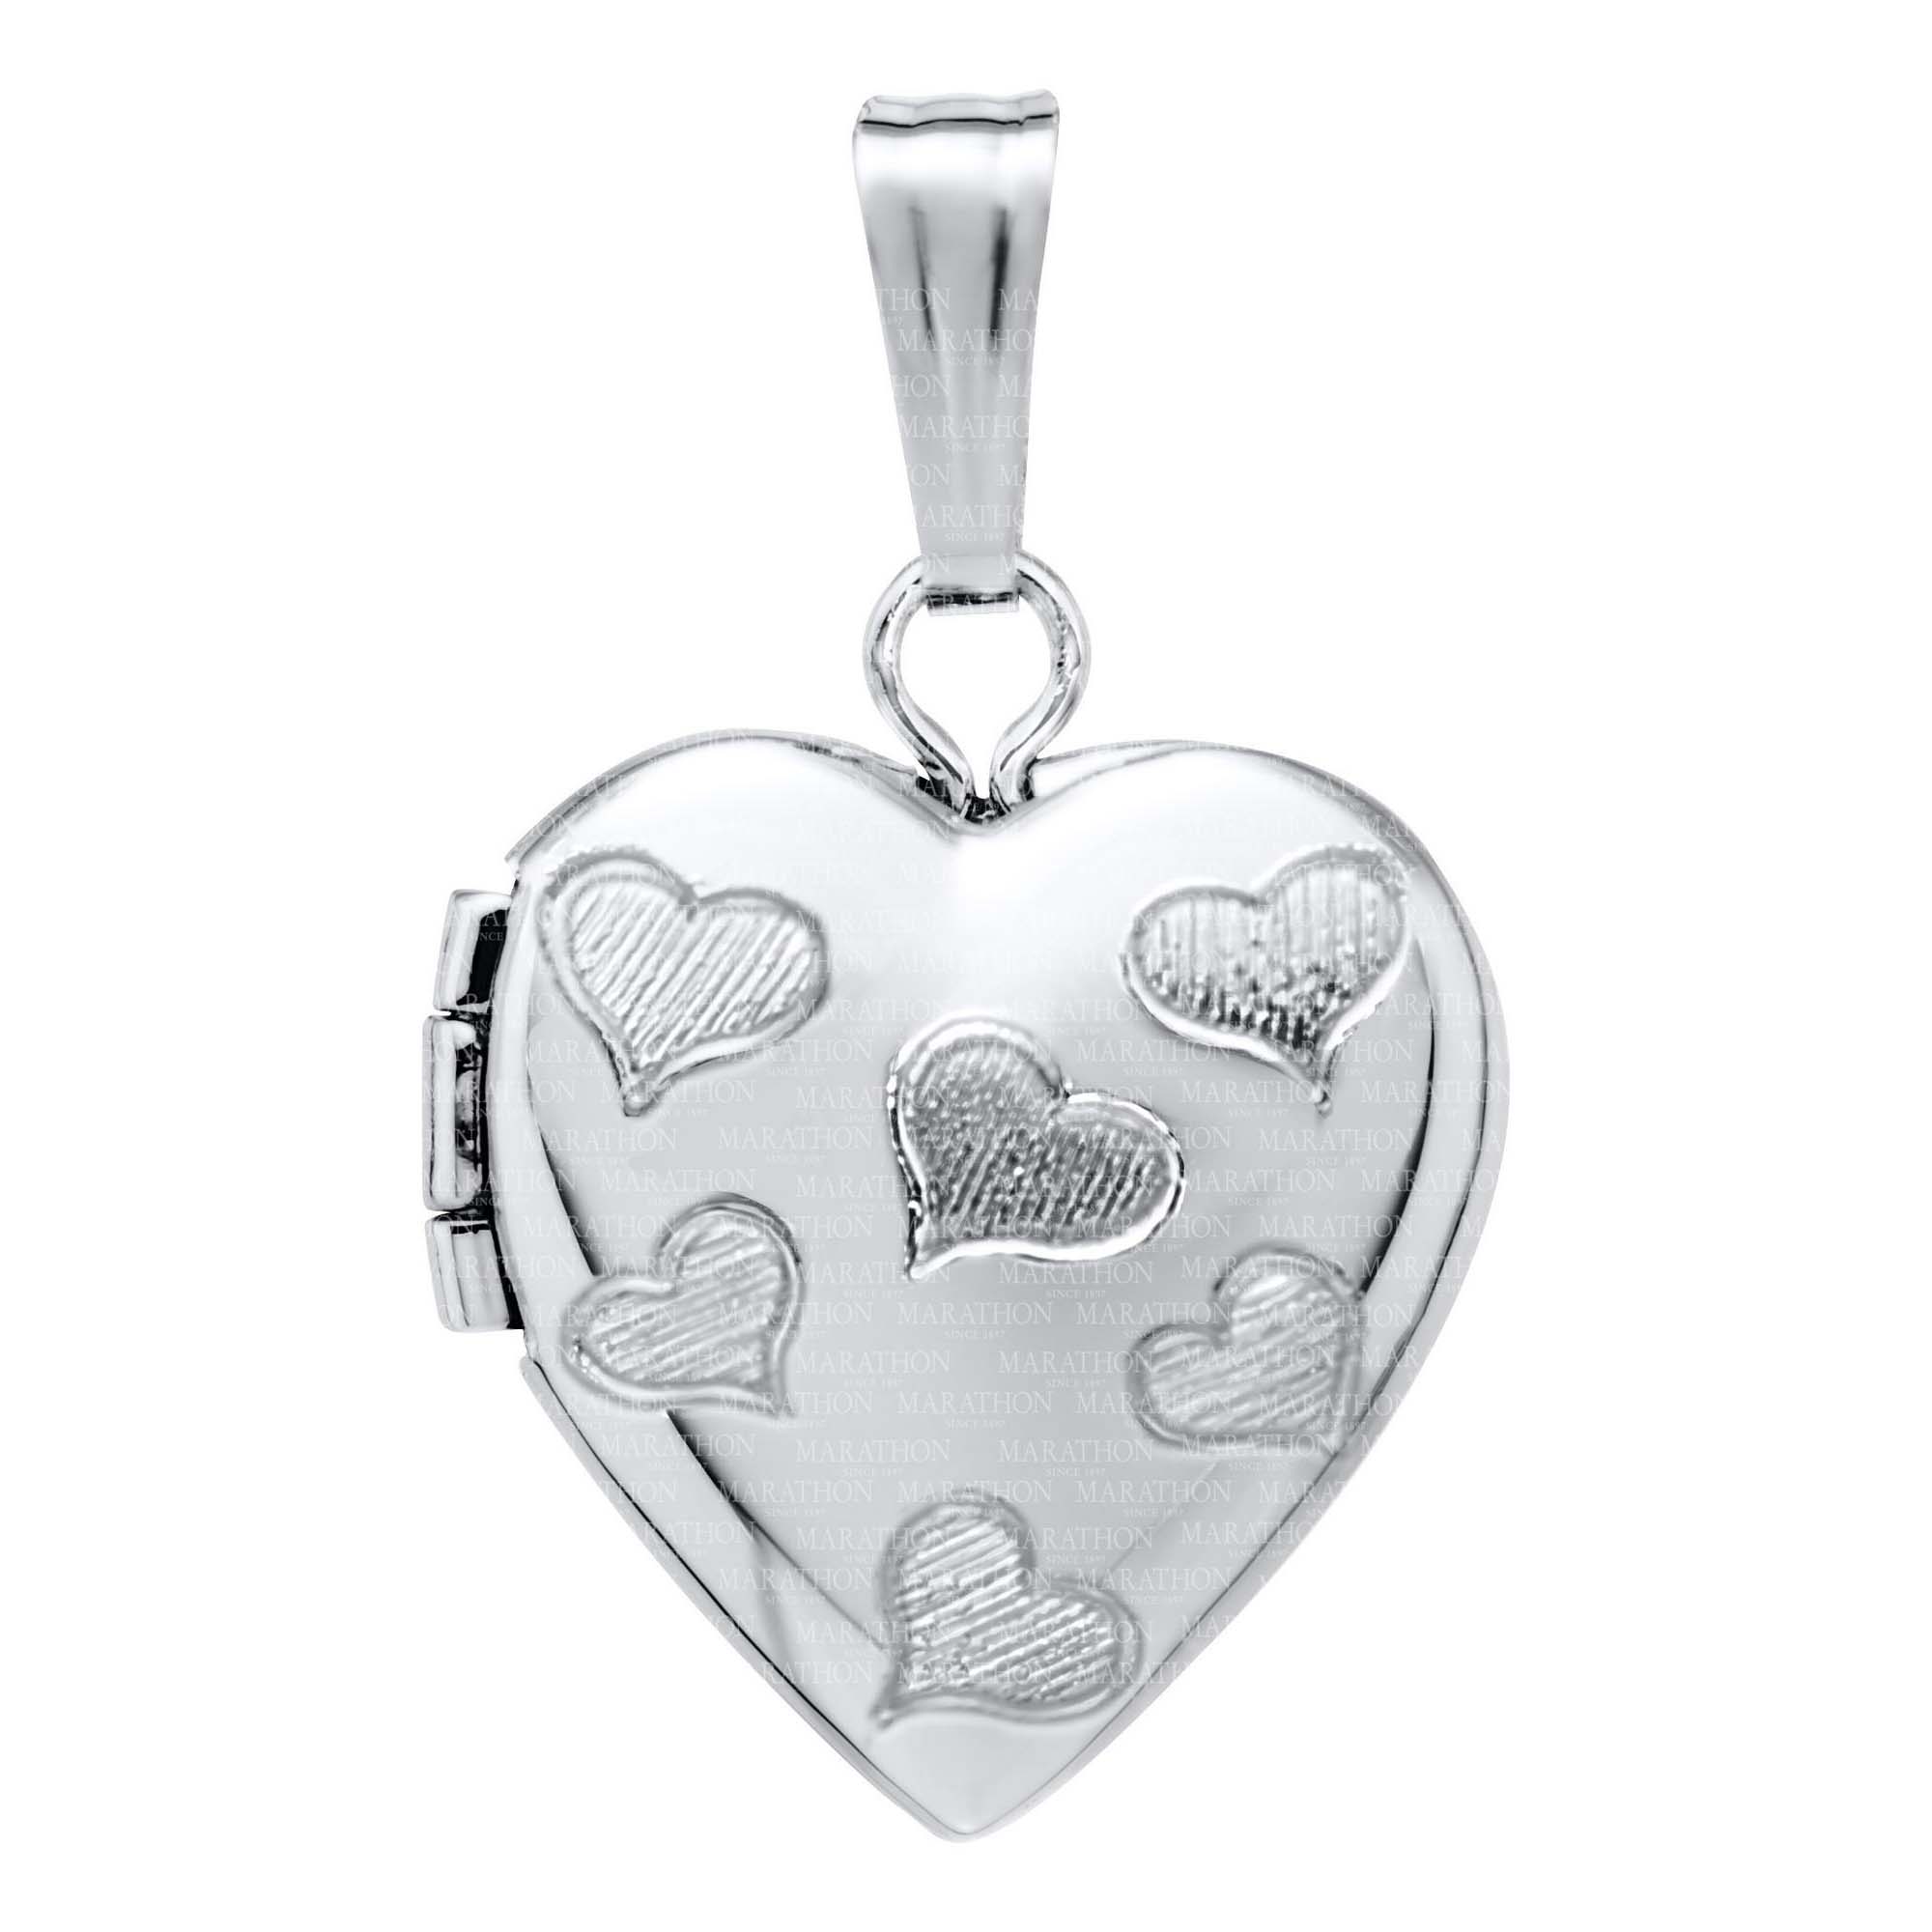 SS Hand Engraved Heart Childs Locket. 12x18mm. 15" chain. #12356